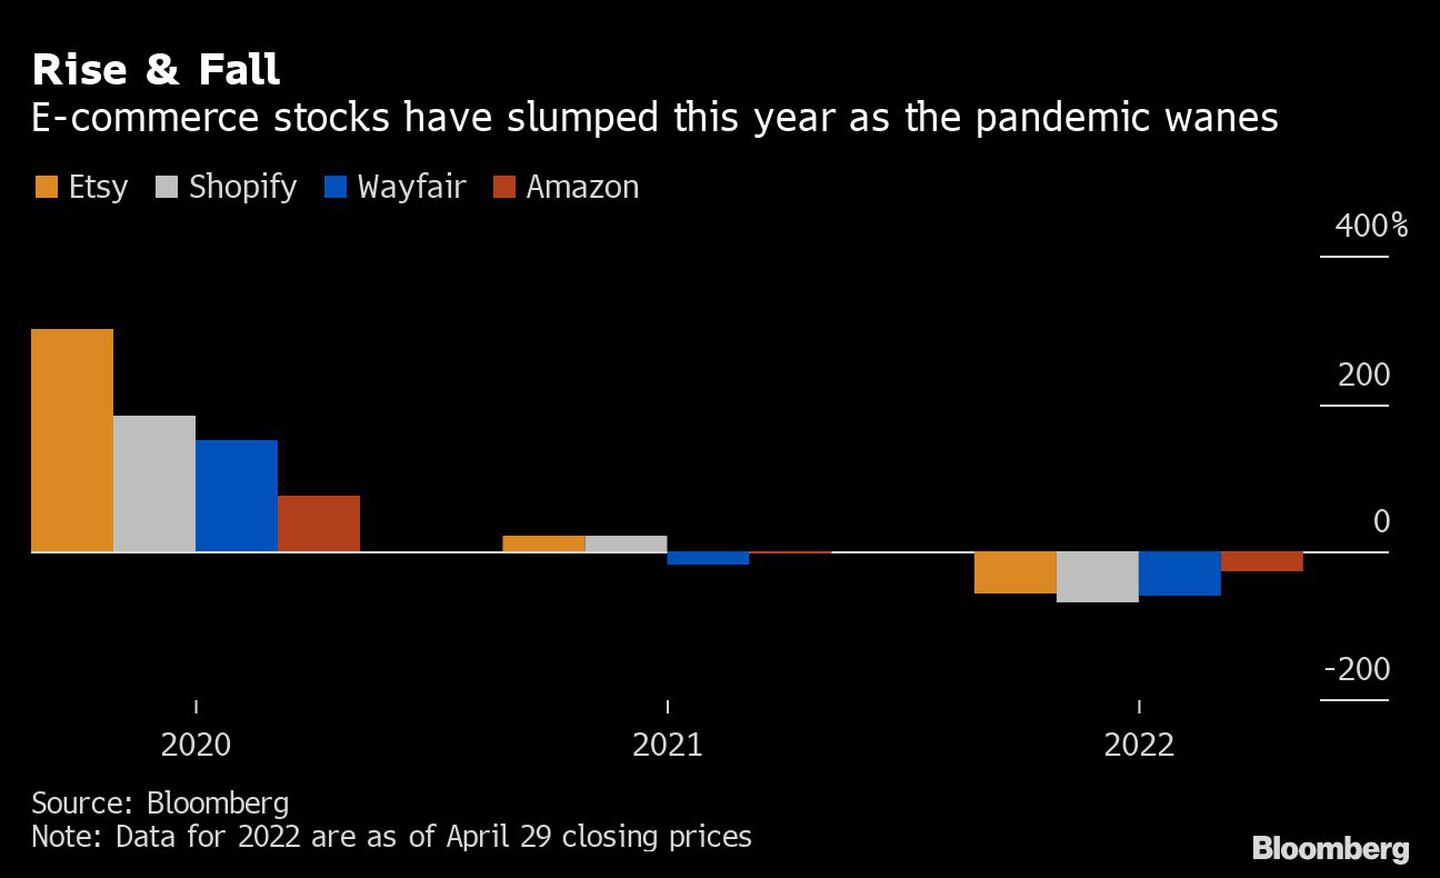 Rise & Fall | E-commerce stocks have slumped this year as the pandemic wanesdfd